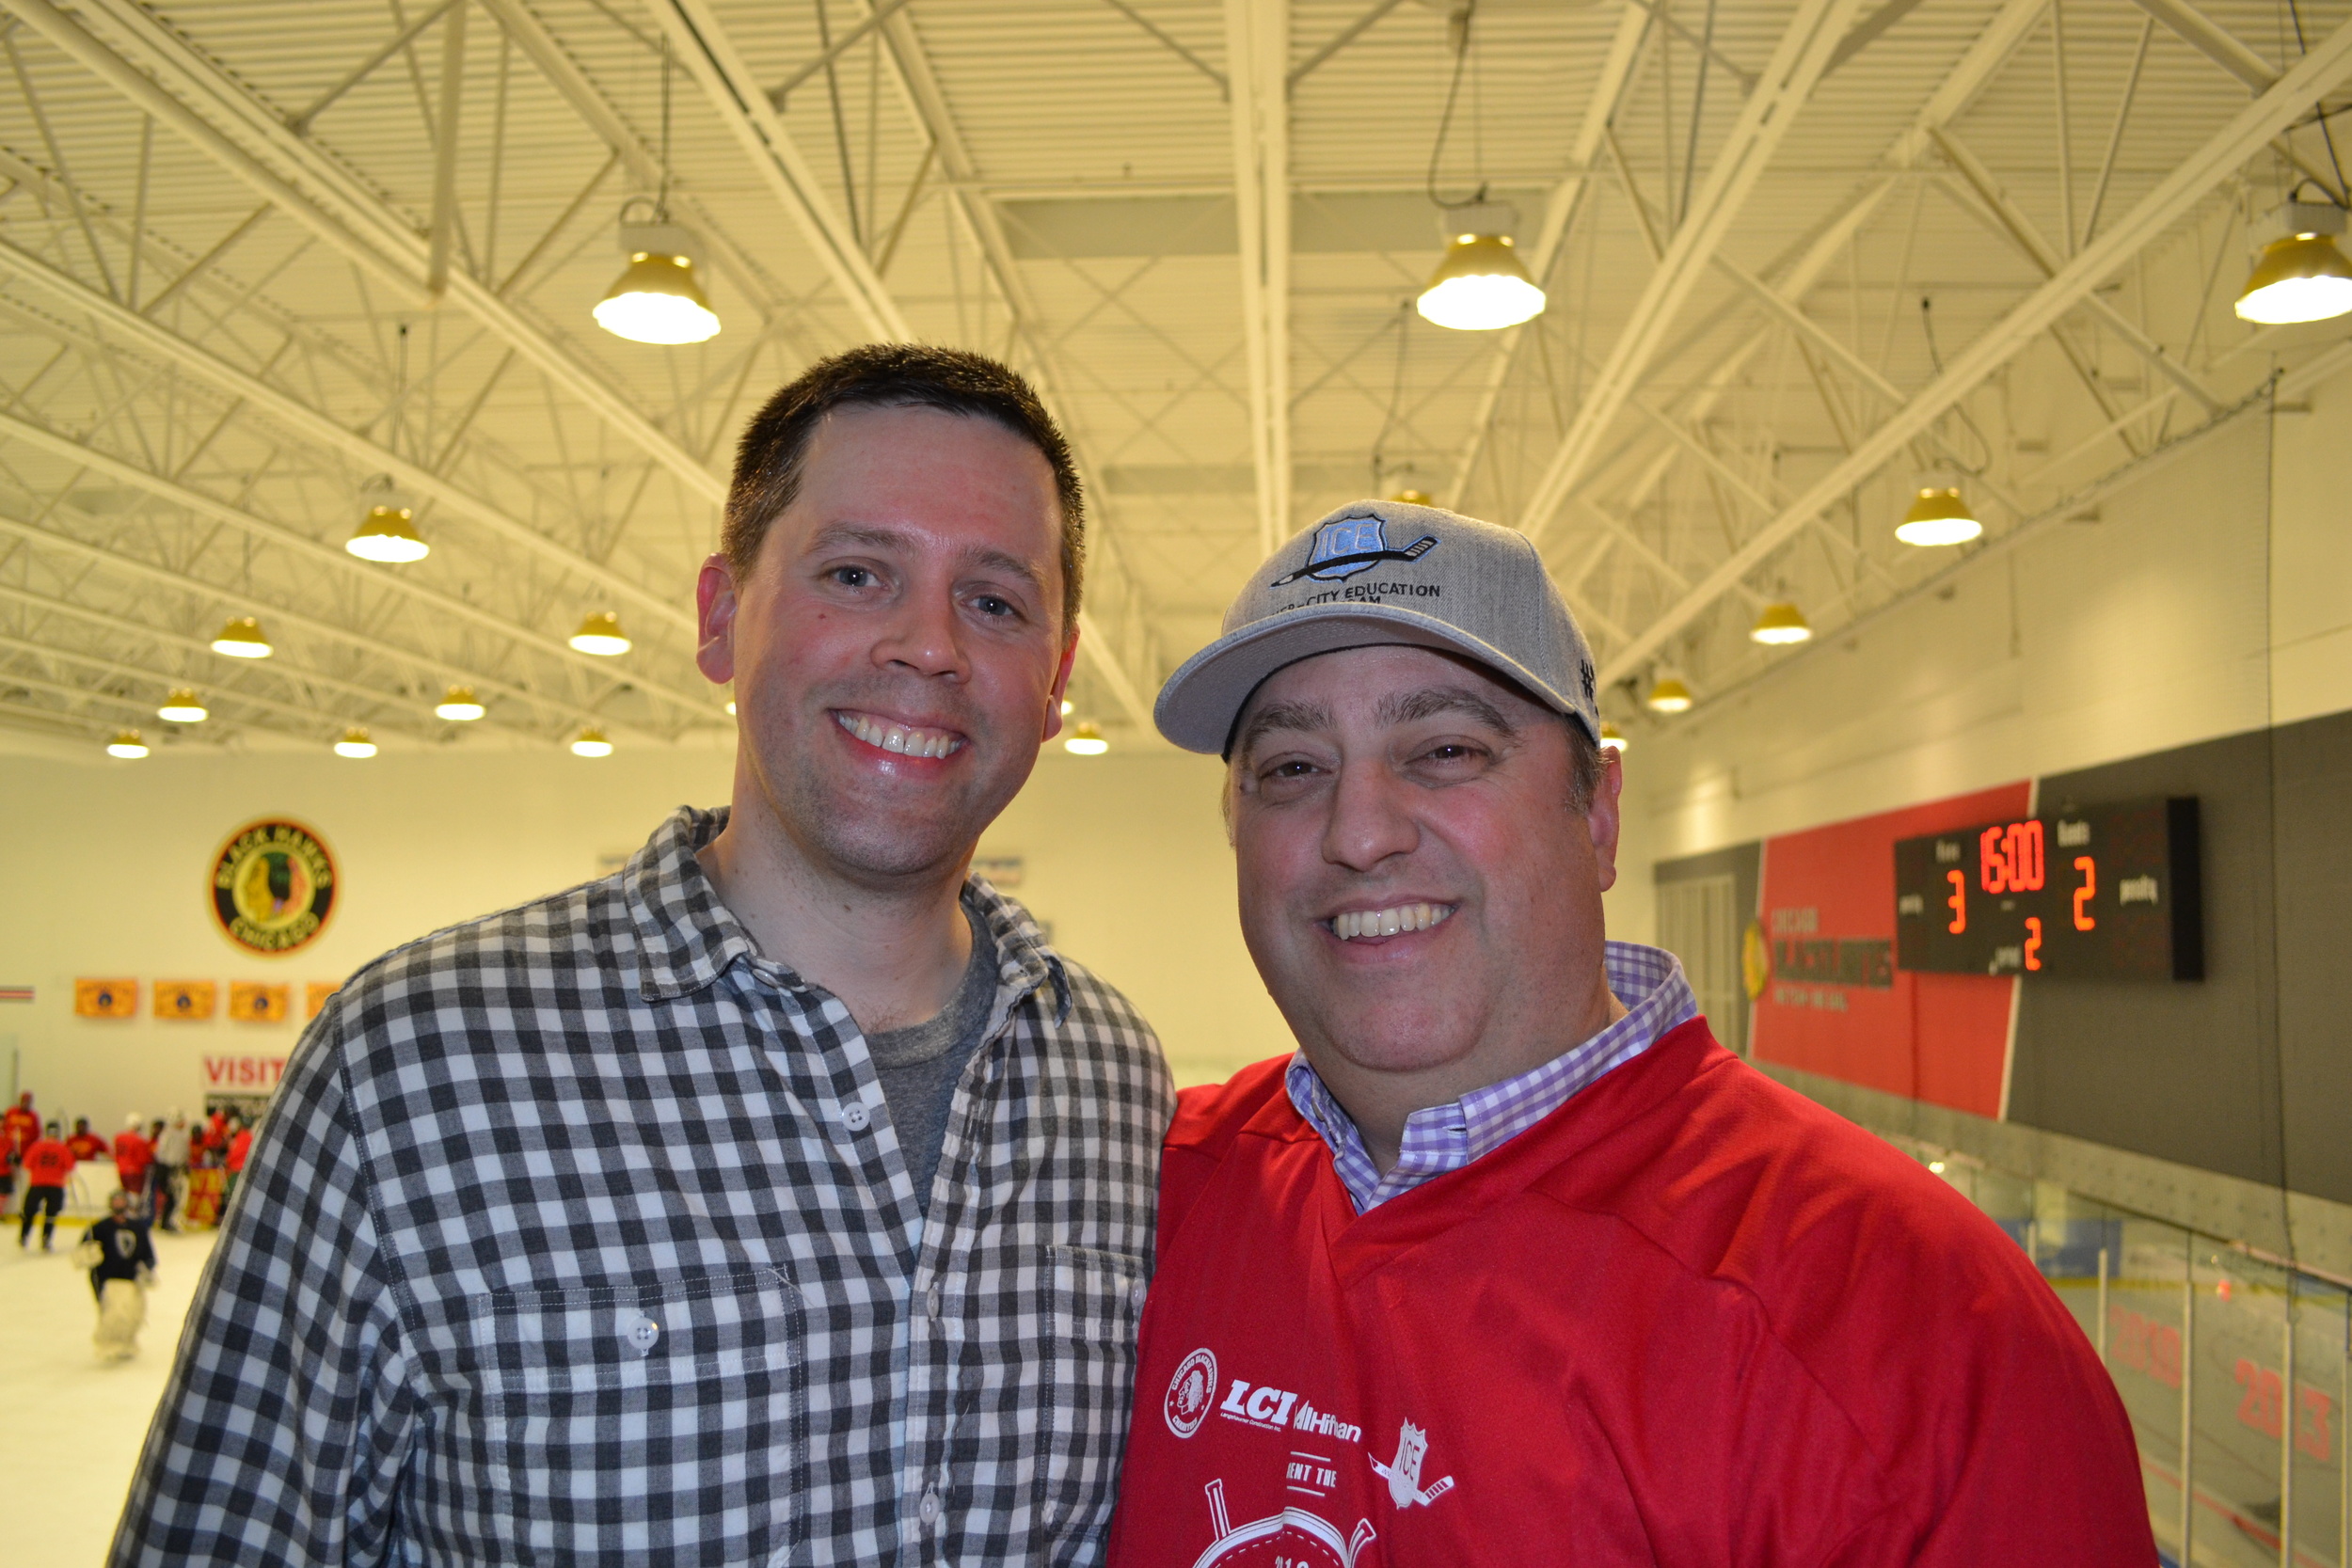  Event co-chairs, Brian Edgerton of NAI Hiffman (left), and Dave Julian of Langehaumer Construction (right). 